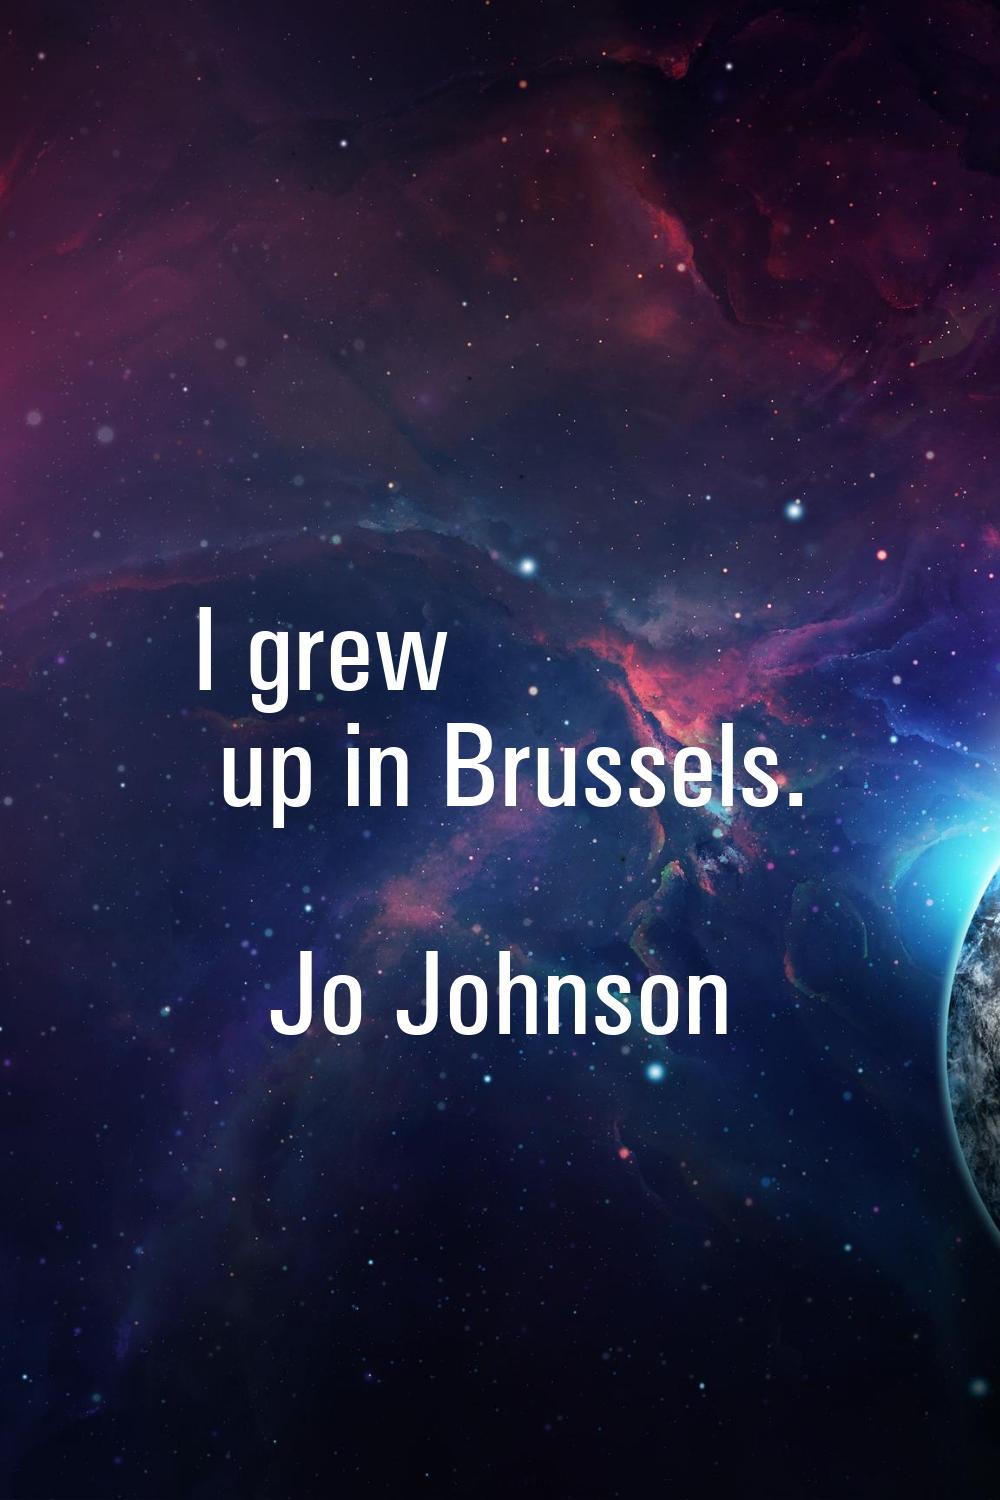 I grew up in Brussels.